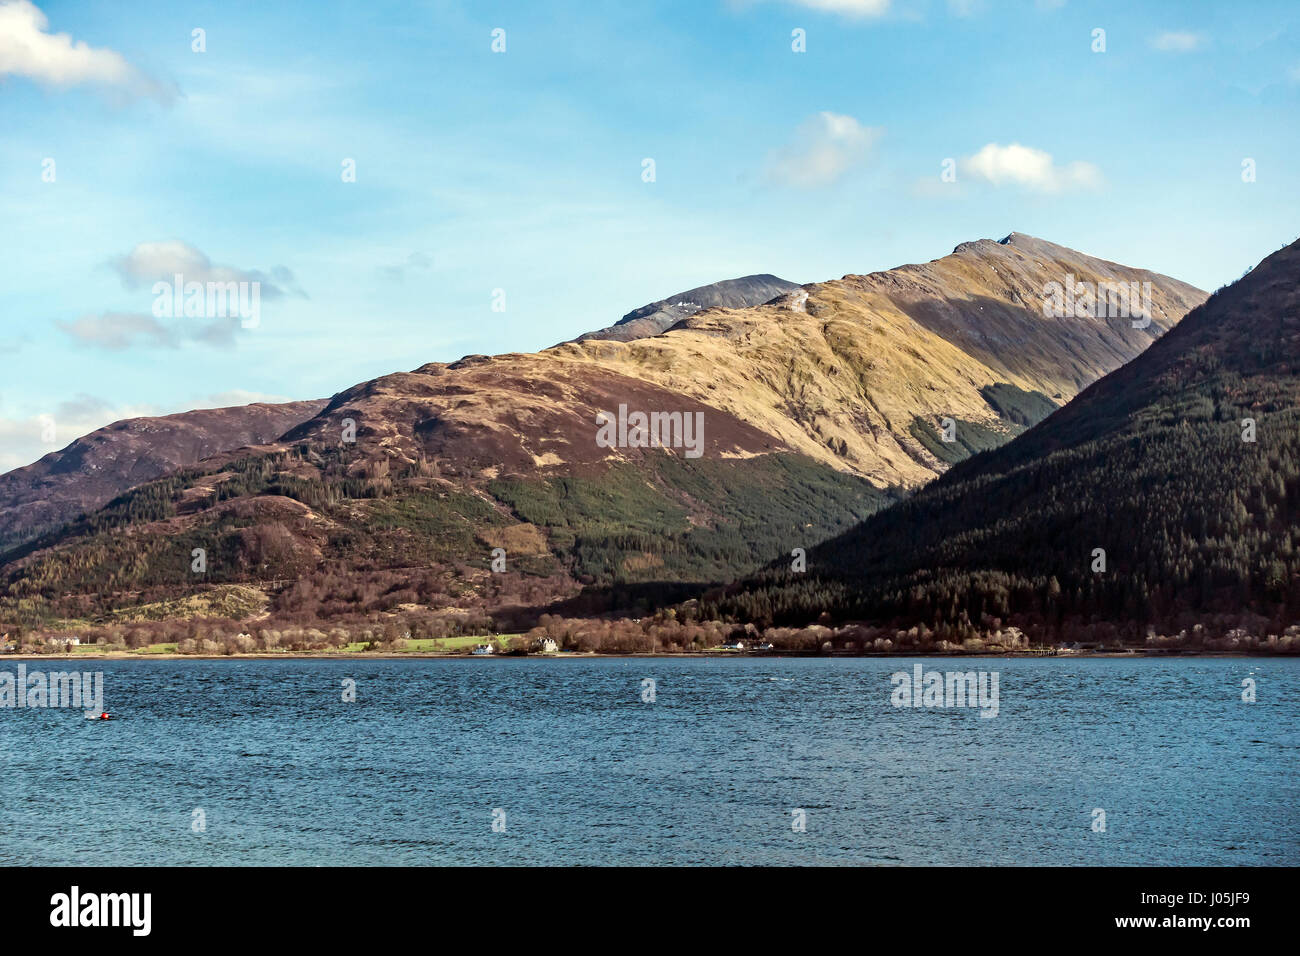 View from Onich across Loch Linnhe towards Ballachulish mountains Sgor Dhonuil (R) & Sgor Dhearg (L) in Highland Scotland UK Stock Photo